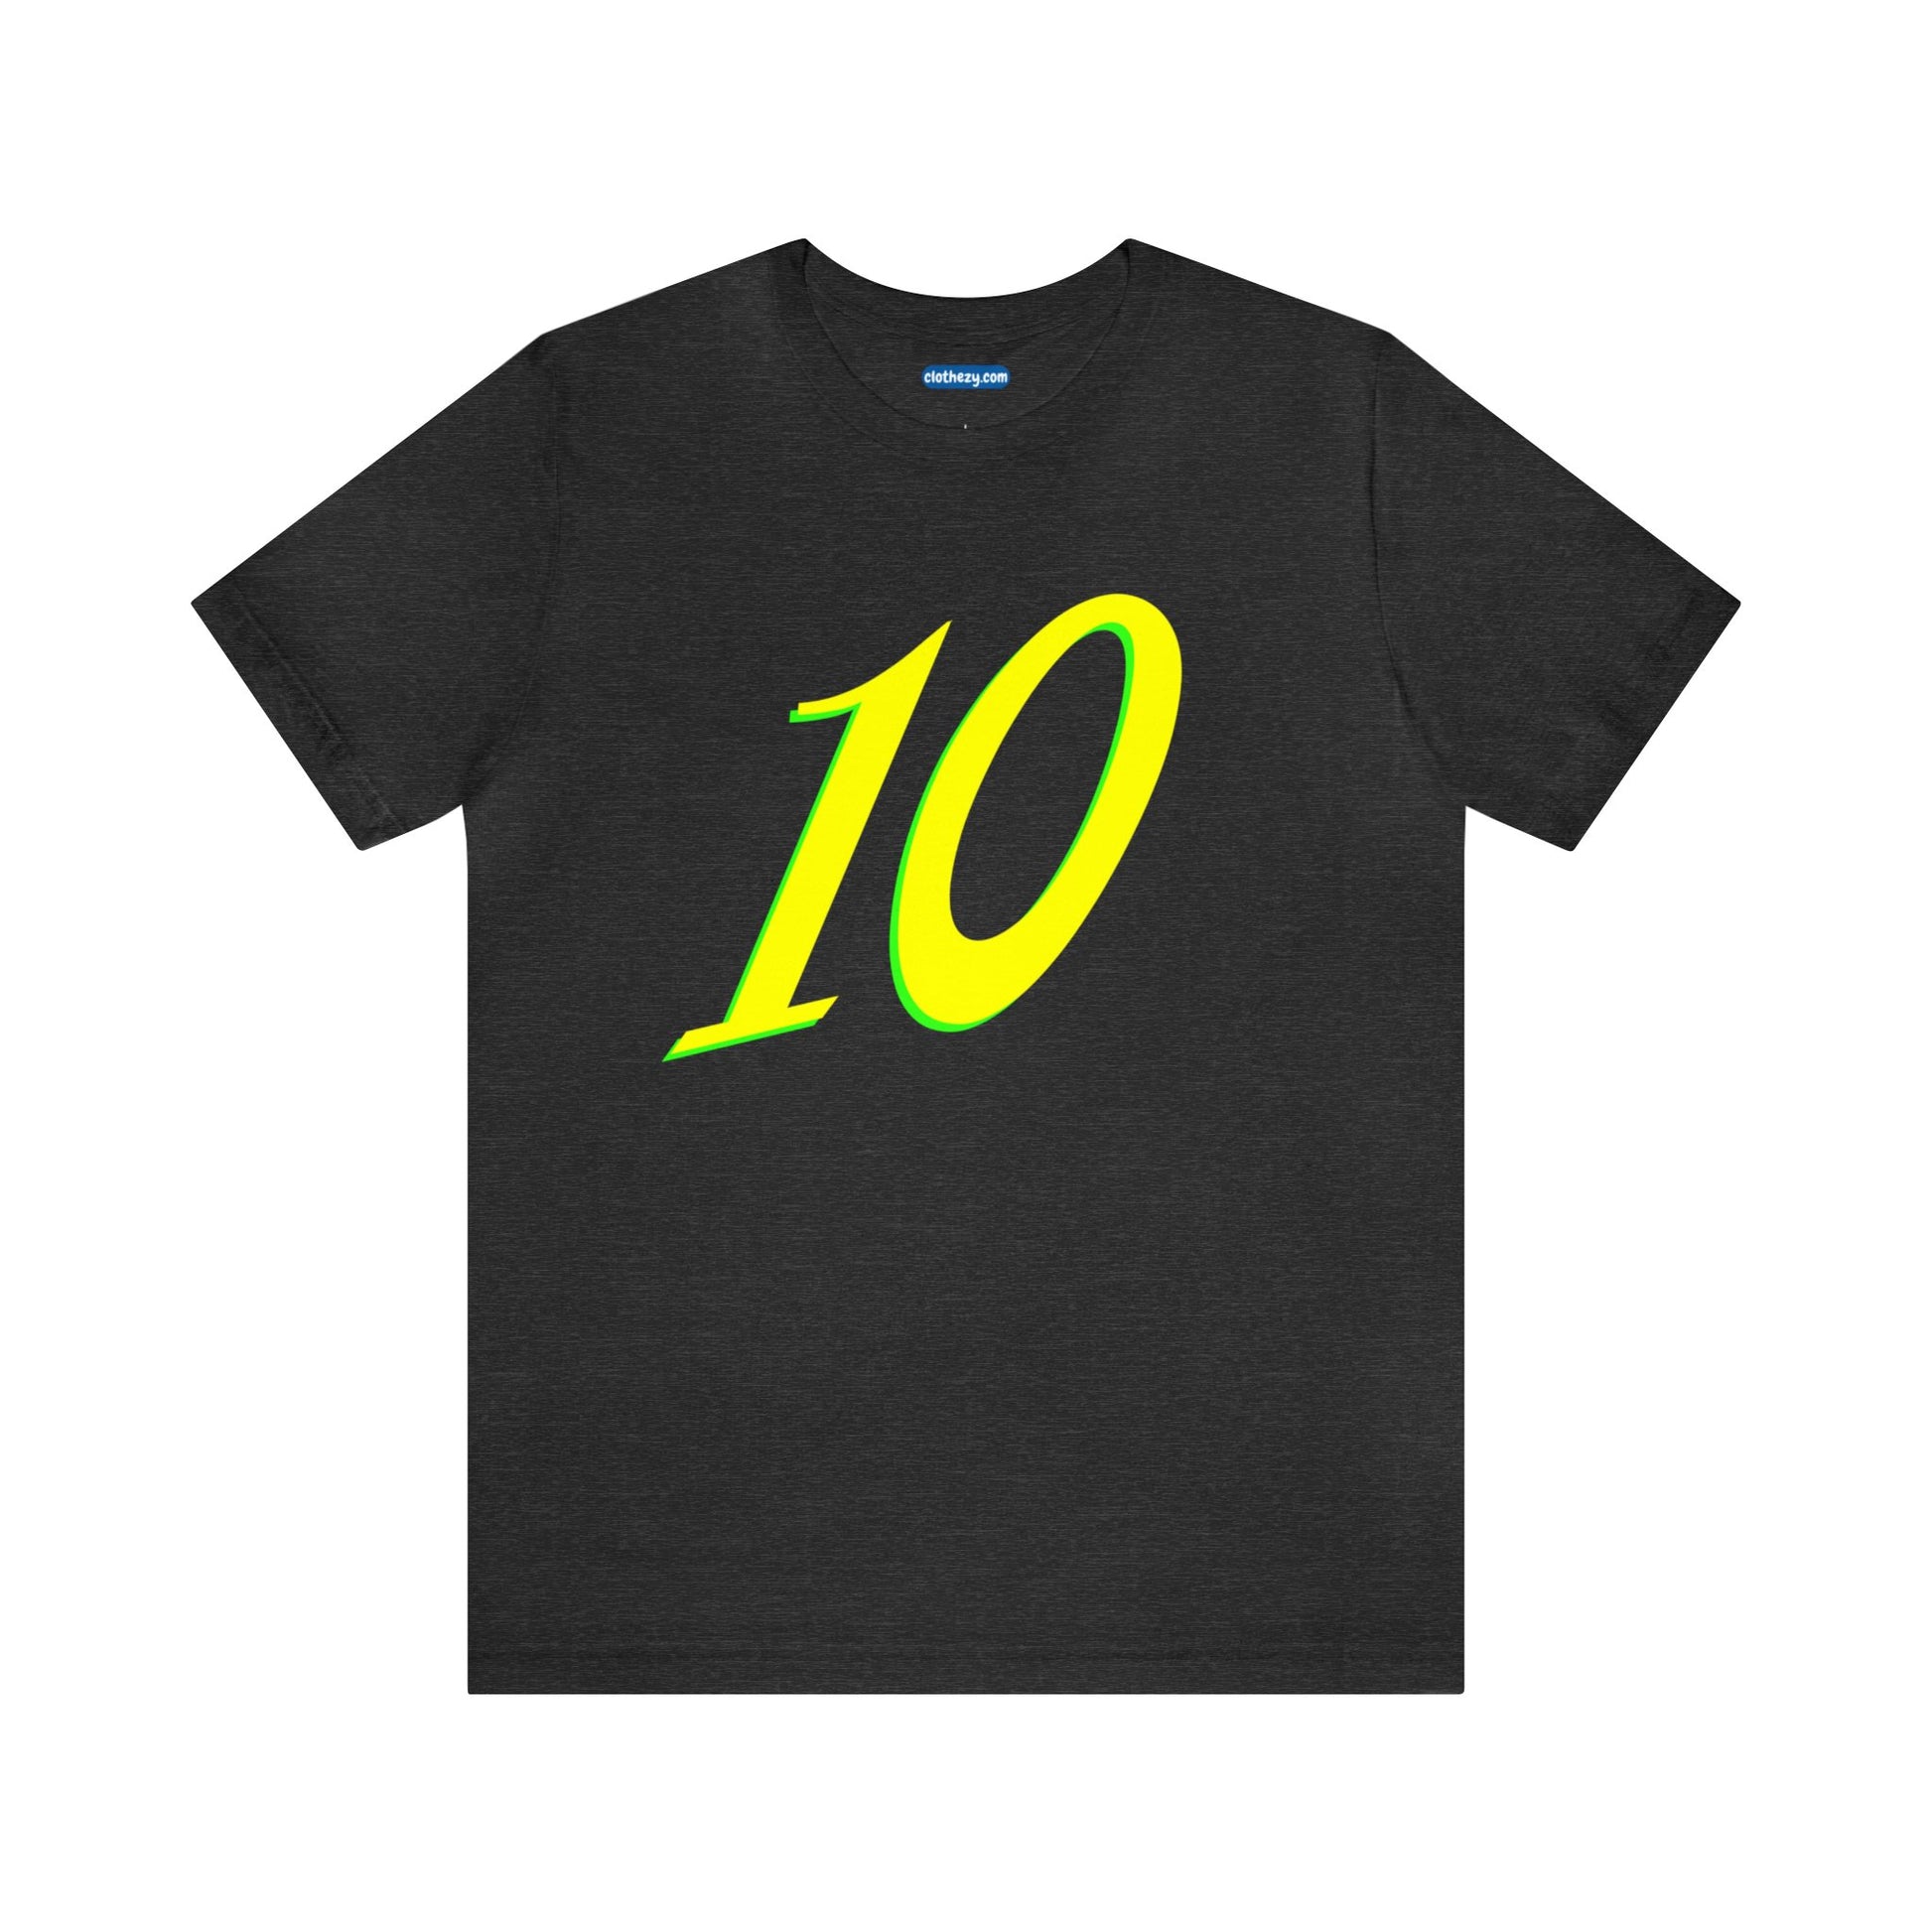 Number 10 Design - Soft Cotton Tee for birthdays and celebrations, Gift for friends and family, Multiple Options by clothezy.com in Dark Grey Heather Size Small - Buy Now